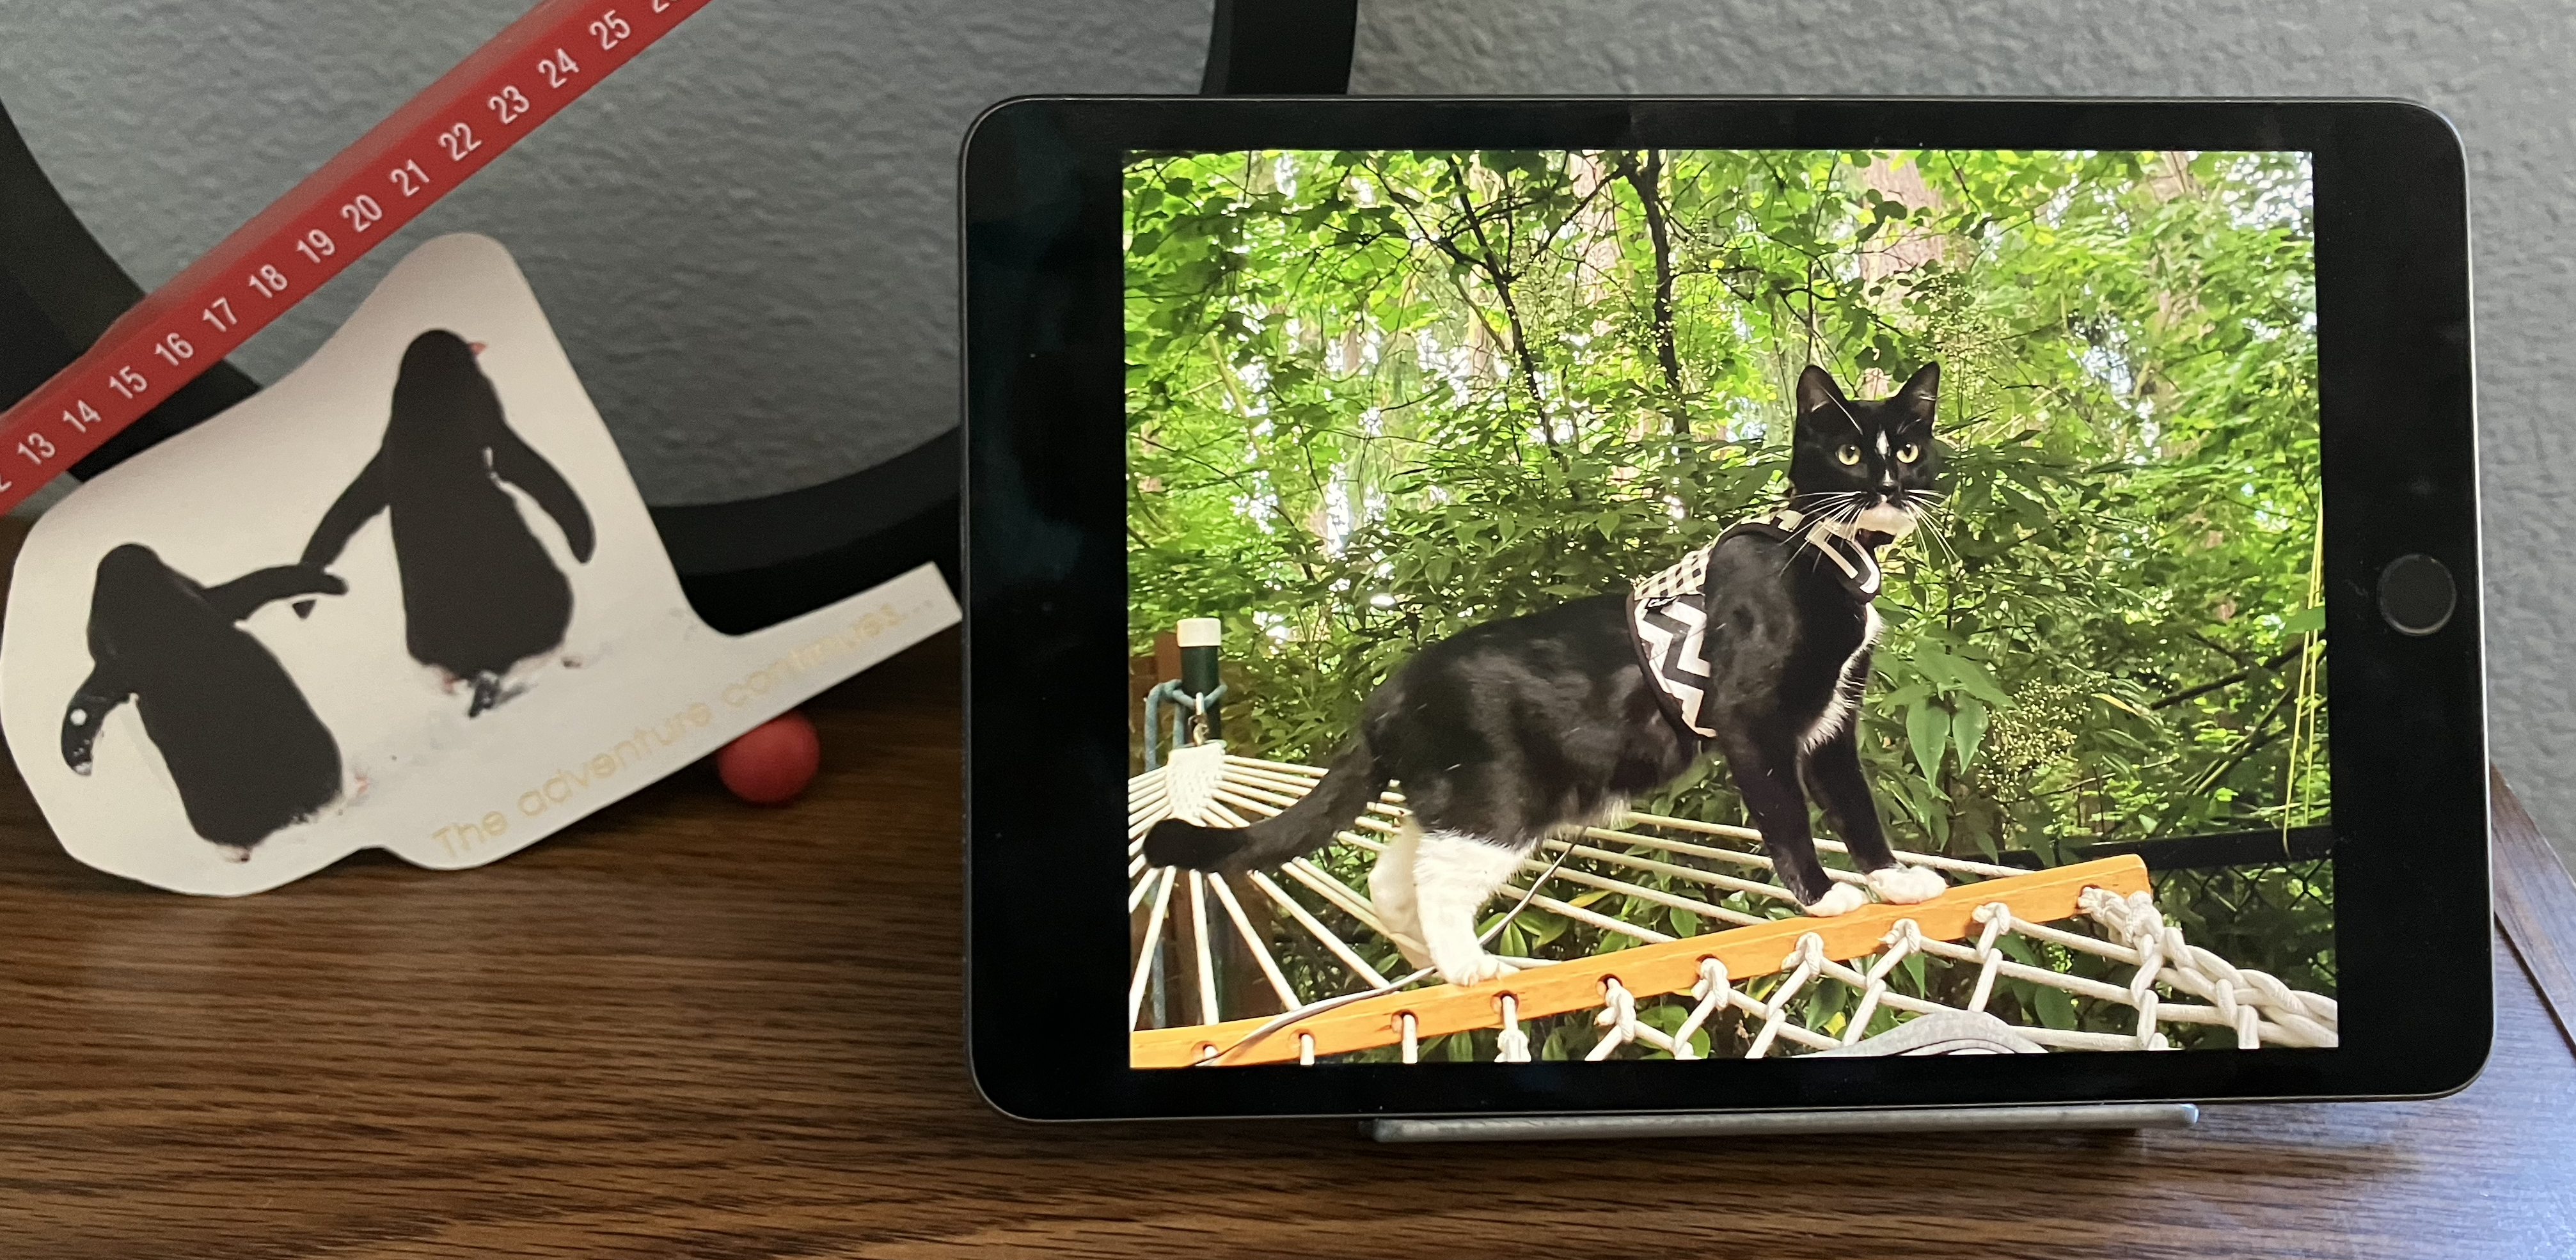 Turn your old iPad into a digital photo frame